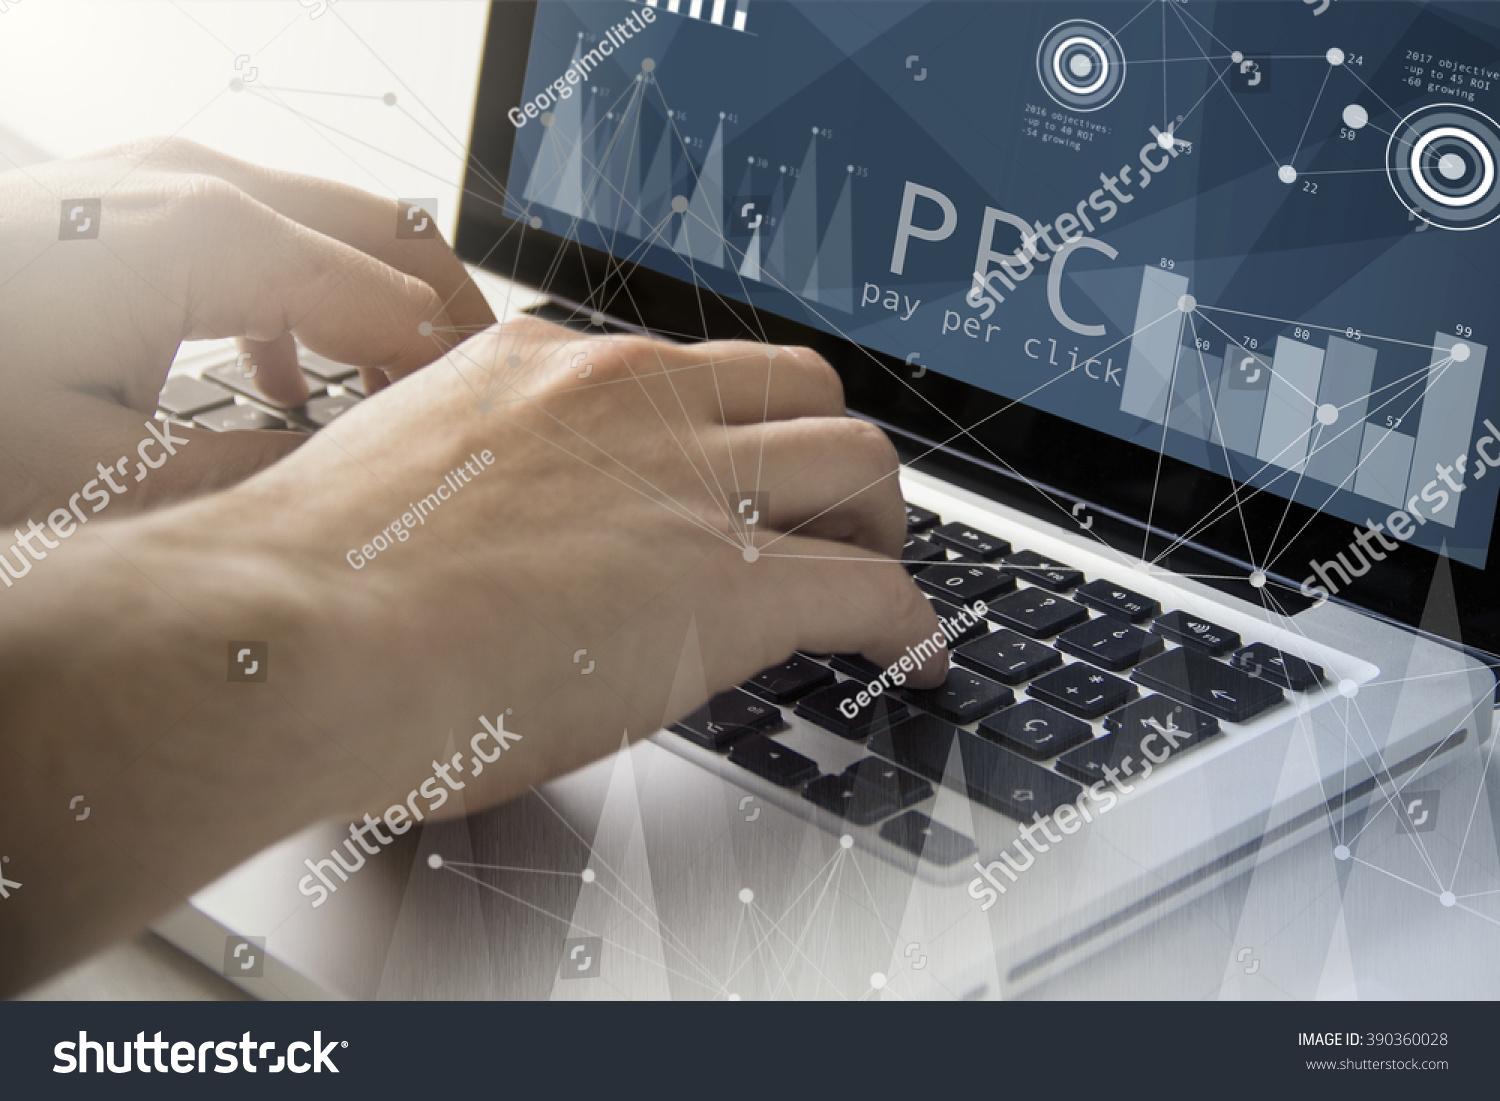 technology and business concept: man using a laptop with pay per click software on the screen. All screen graphics are made up. #390360028